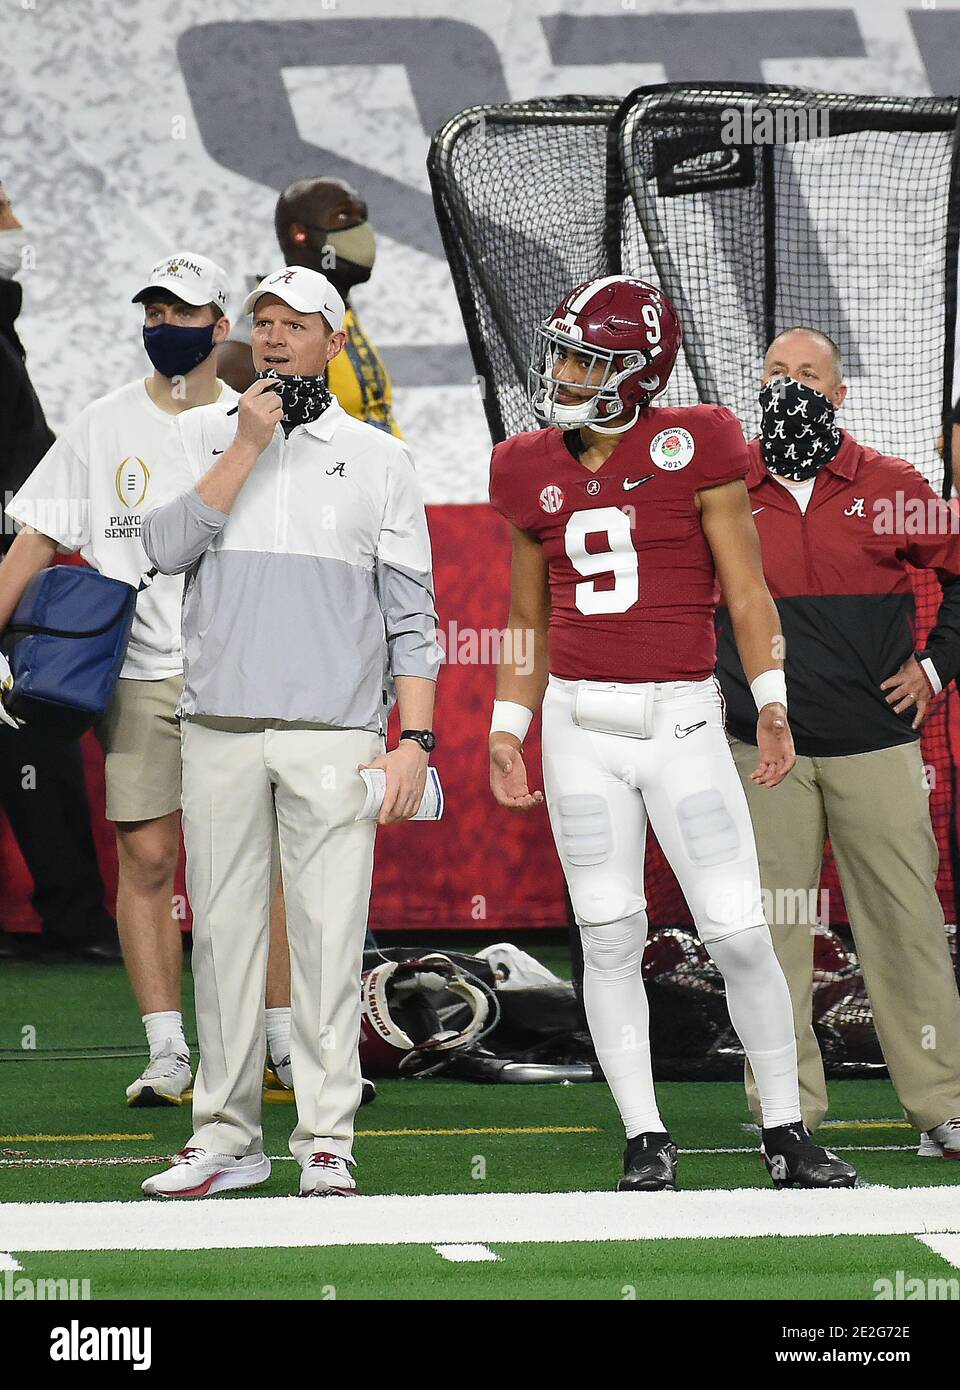 January 1, 2021 Arlington, TX.Alabama Crimson Tide freshman back-up  quarterback (9) Bryce Young who did not play, pictured with former Texas,  and Houston head coach Major Applewhite, who is now an Offensive